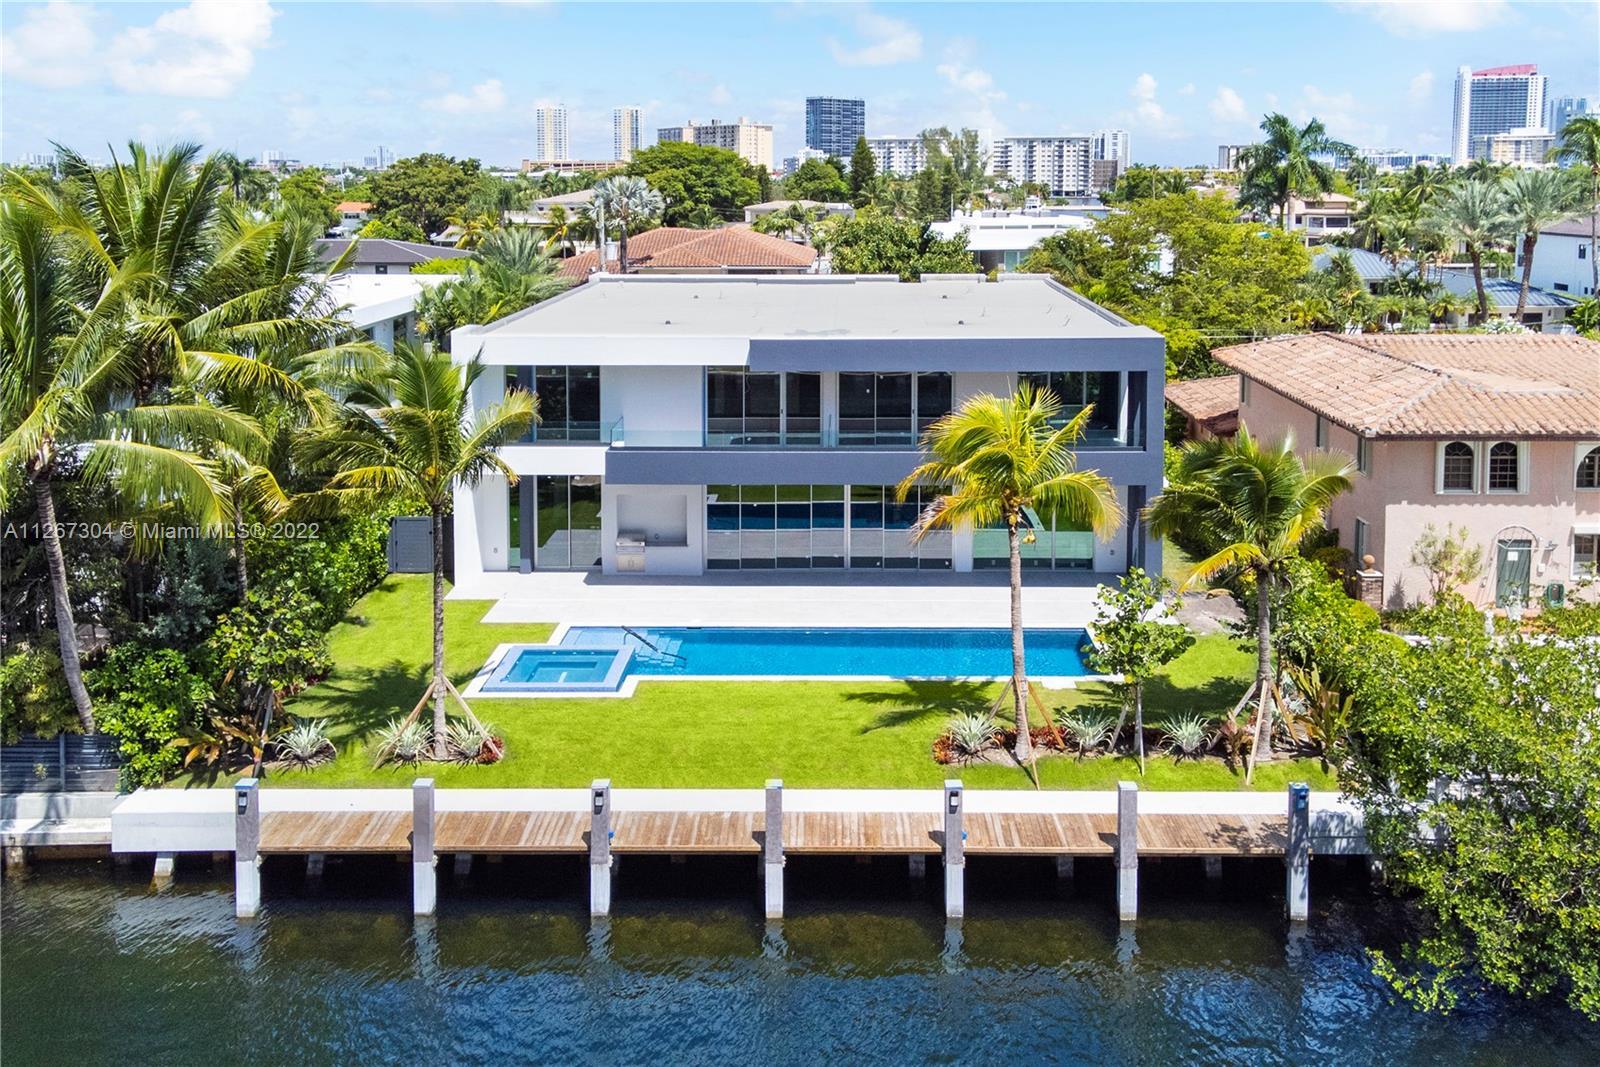 Experience the luxury lifestyle you deserve with this waterfront property in the exclusive gated com